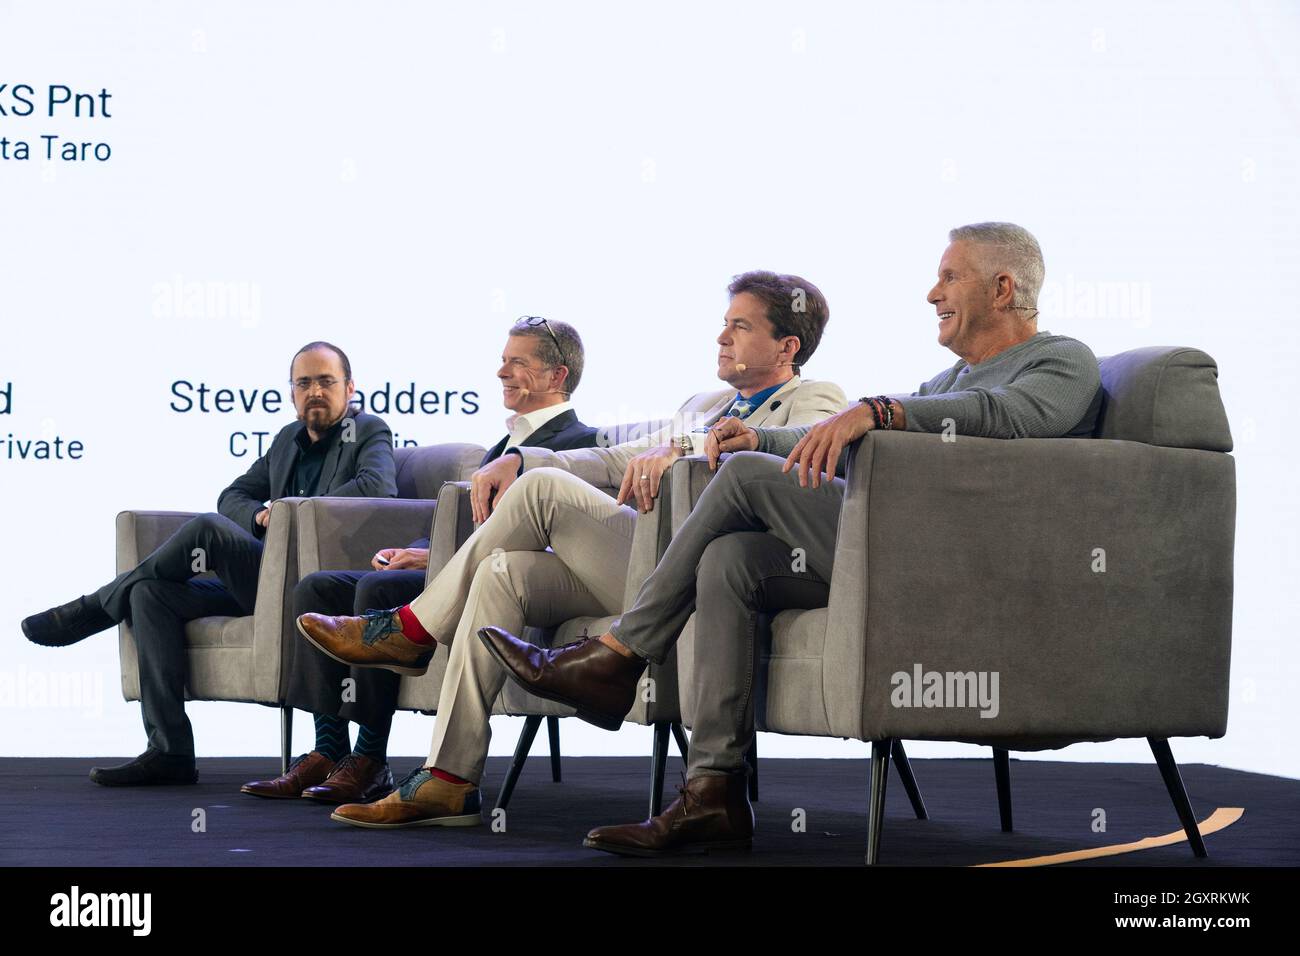 New York, USA. 05th Oct, 2021. Judges for finalists of hackthon sit on stage during CoinGeek Conference at Sheraton Times Square in New York on October 5, 2021. Judges are (L - R) Steve Shadders, CTO nChain, Paul Rajchod, Managing Director of Ayre Venture, Dr. Craig Wright, Chief Scientist nChain, Donny Deutsch, TV Personality. (Photo by Lev Radin/Sipa USA) Credit: Sipa USA/Alamy Live News Stock Photo